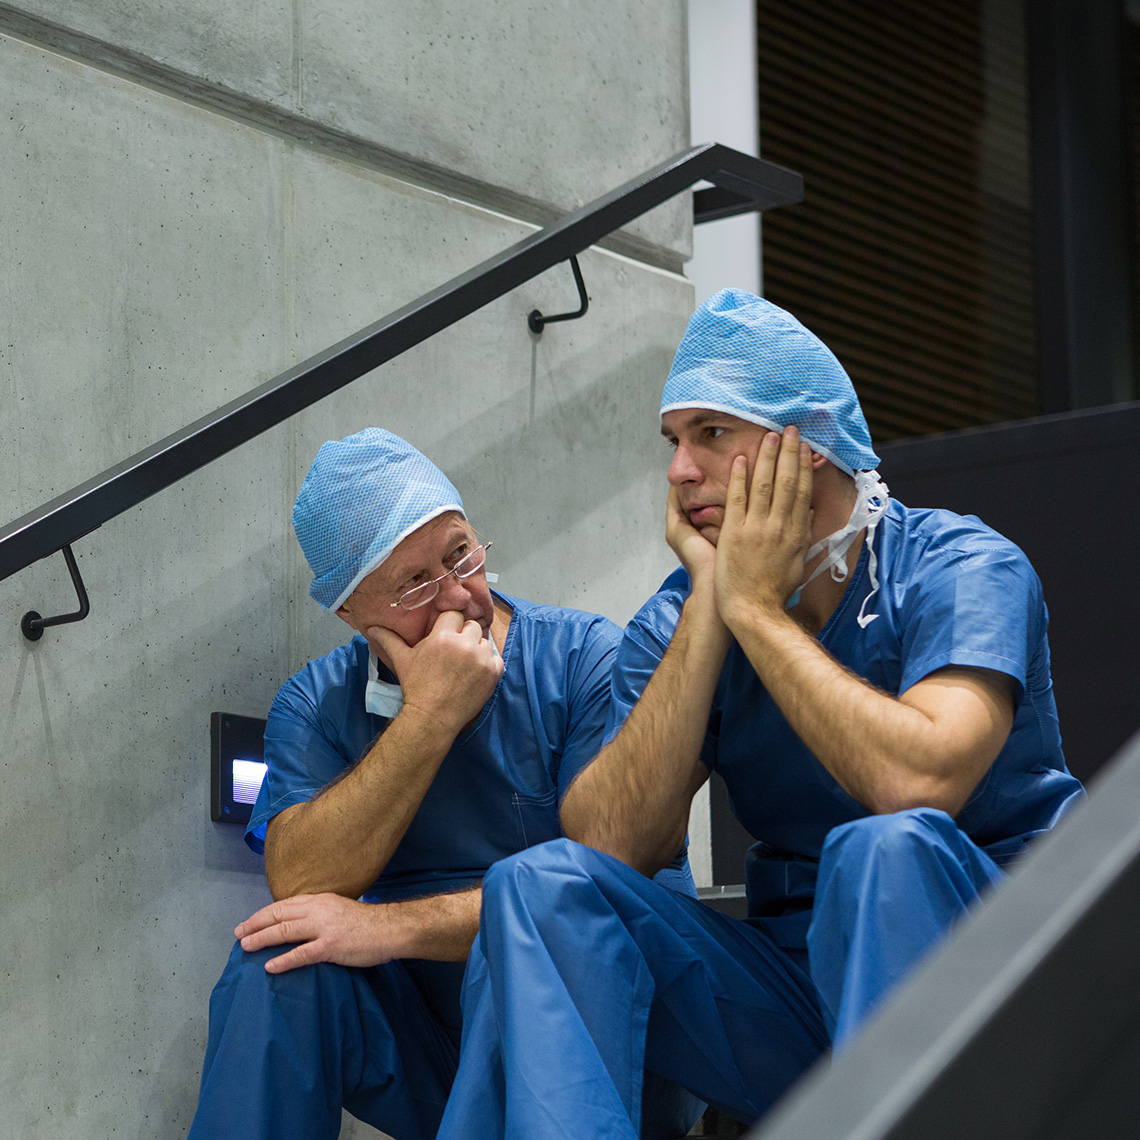 two physicians sitting in a stairwell talking